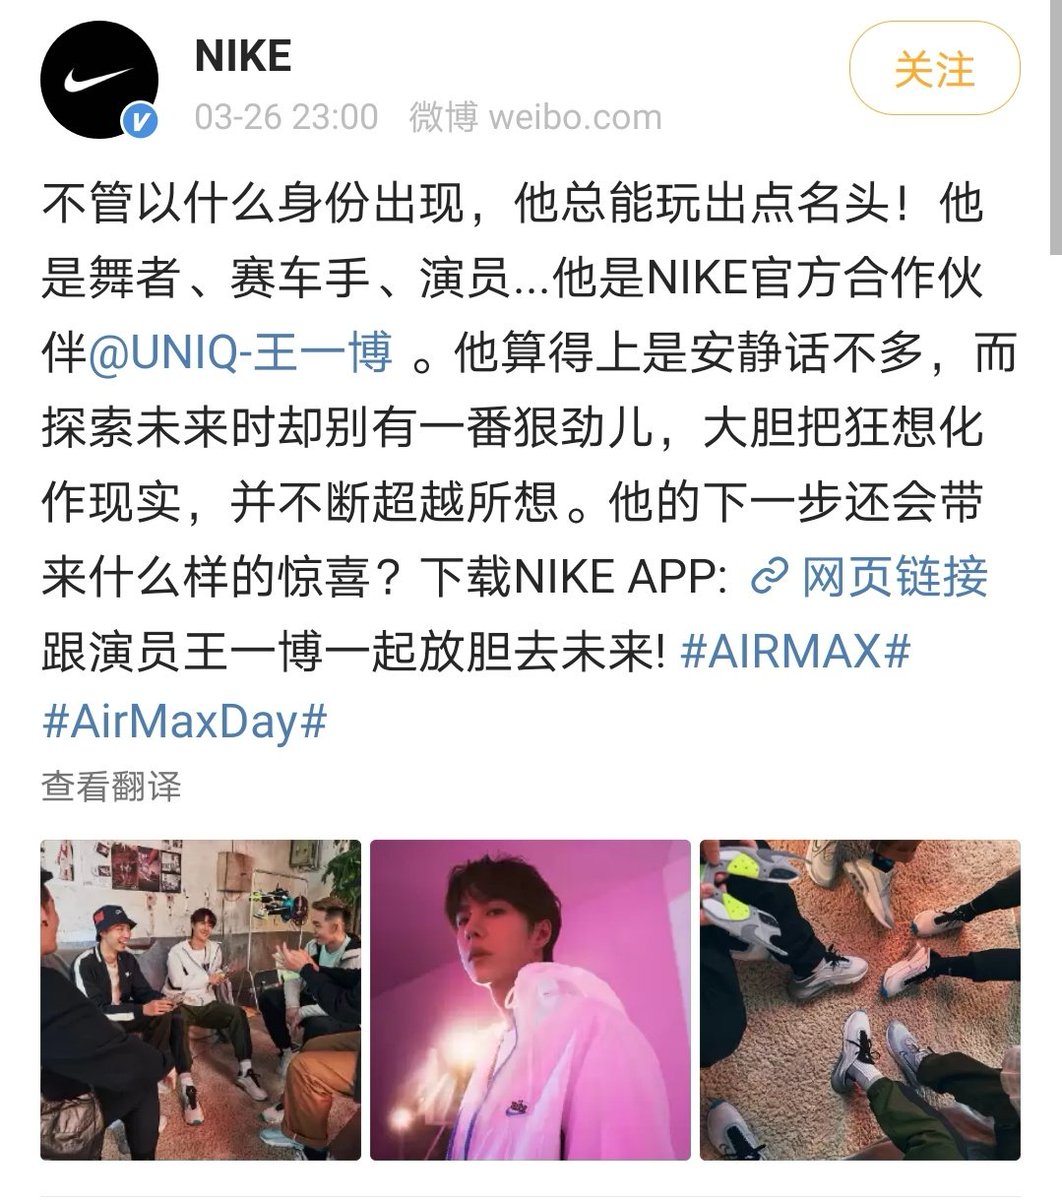 12-Nike: Official Partner.It was announced on 26 March 2020.Nike has always been looking for top athletes as spokespersons. Yibo has always had a soft spot for Nike. It was revealed in DDU 2019 that Nike sends him shoes. Now he became the only Official Nike Partner in China.